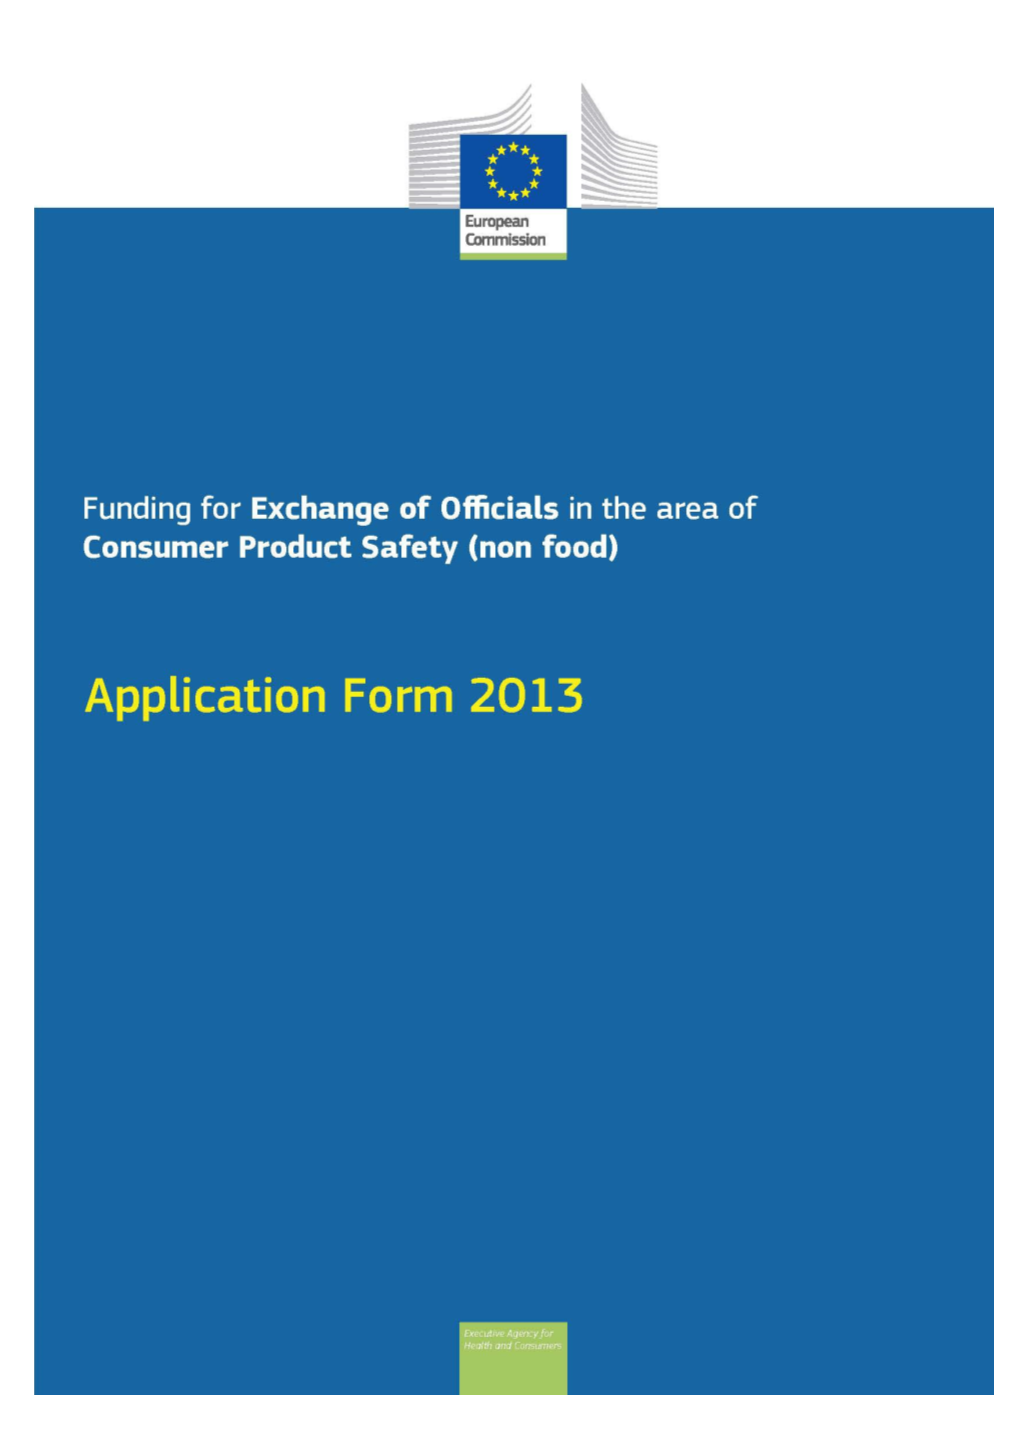 FUNDING for the EXCHANGE of OFFICIALS in the AREA of CONSUMER (Non-Food) PRODUCT SAFETY